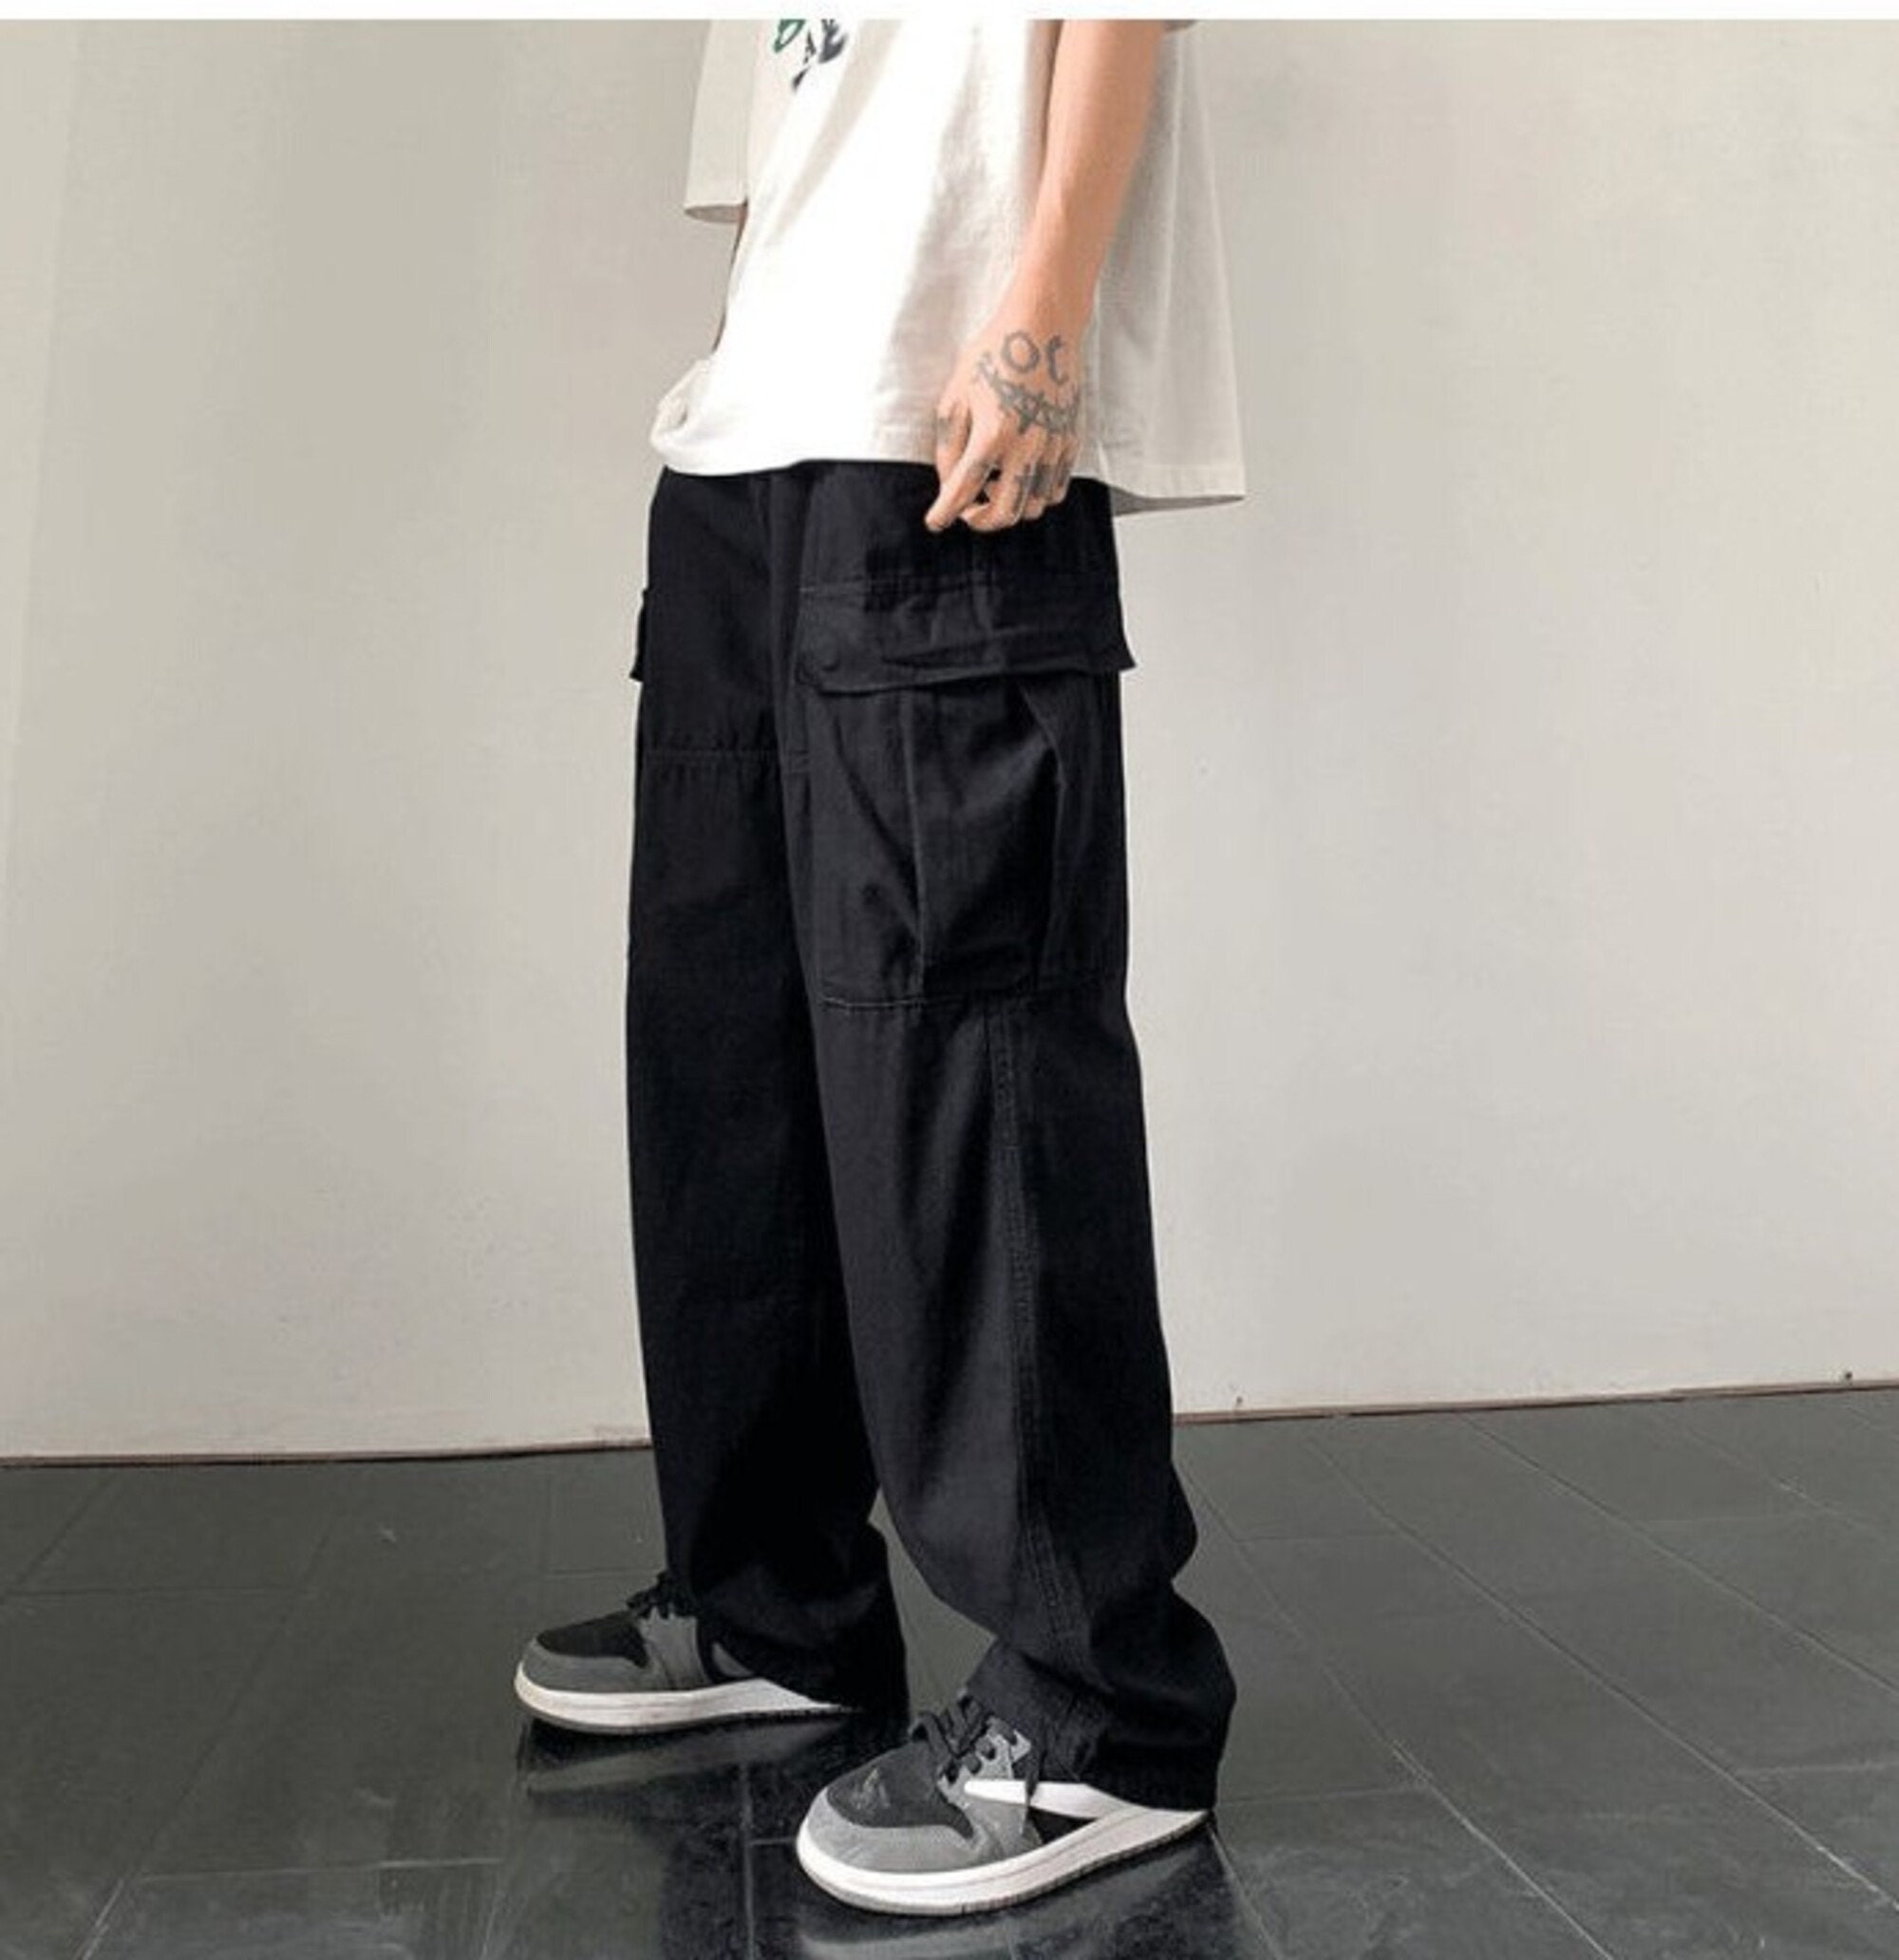 Casual Baggy Wide Leg Sweatpants 2022 Loose High Waist Streetwear Cargo Pants Womens Hippie Joggers Trousers Y2k Clothes